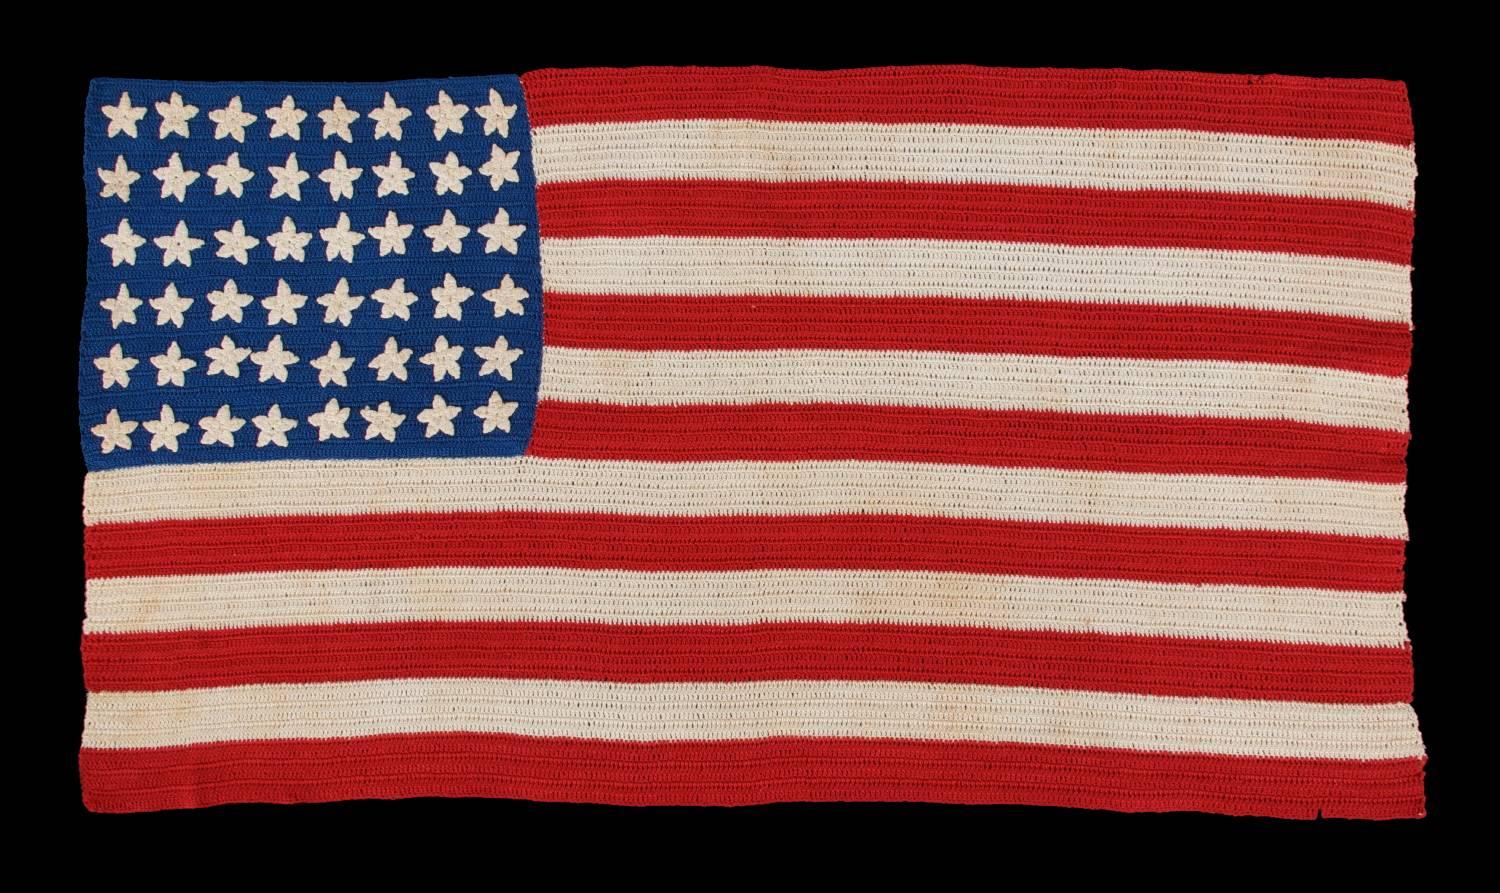 48 stars, crocheted, a beautiful example, WWI - WWII Era 

Beginning around the turn of the century, it became popular to make American flags from various forms of needlework, primarily by tatting and crochet. This one was probably made from a